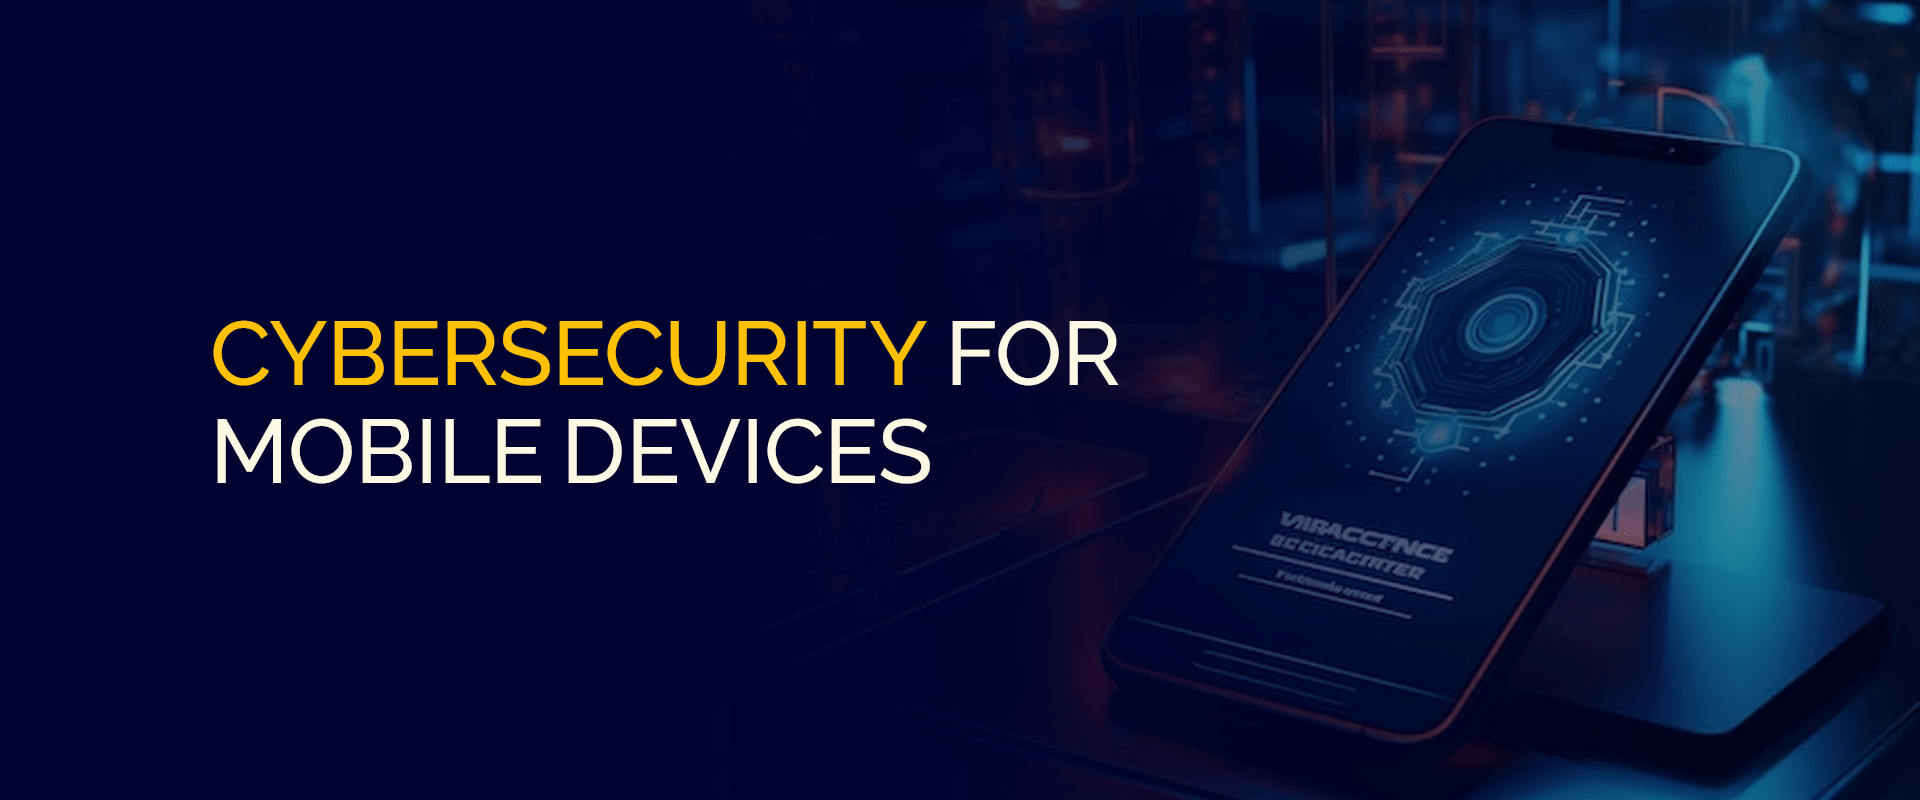 Cybersecurity For Mobile Devices